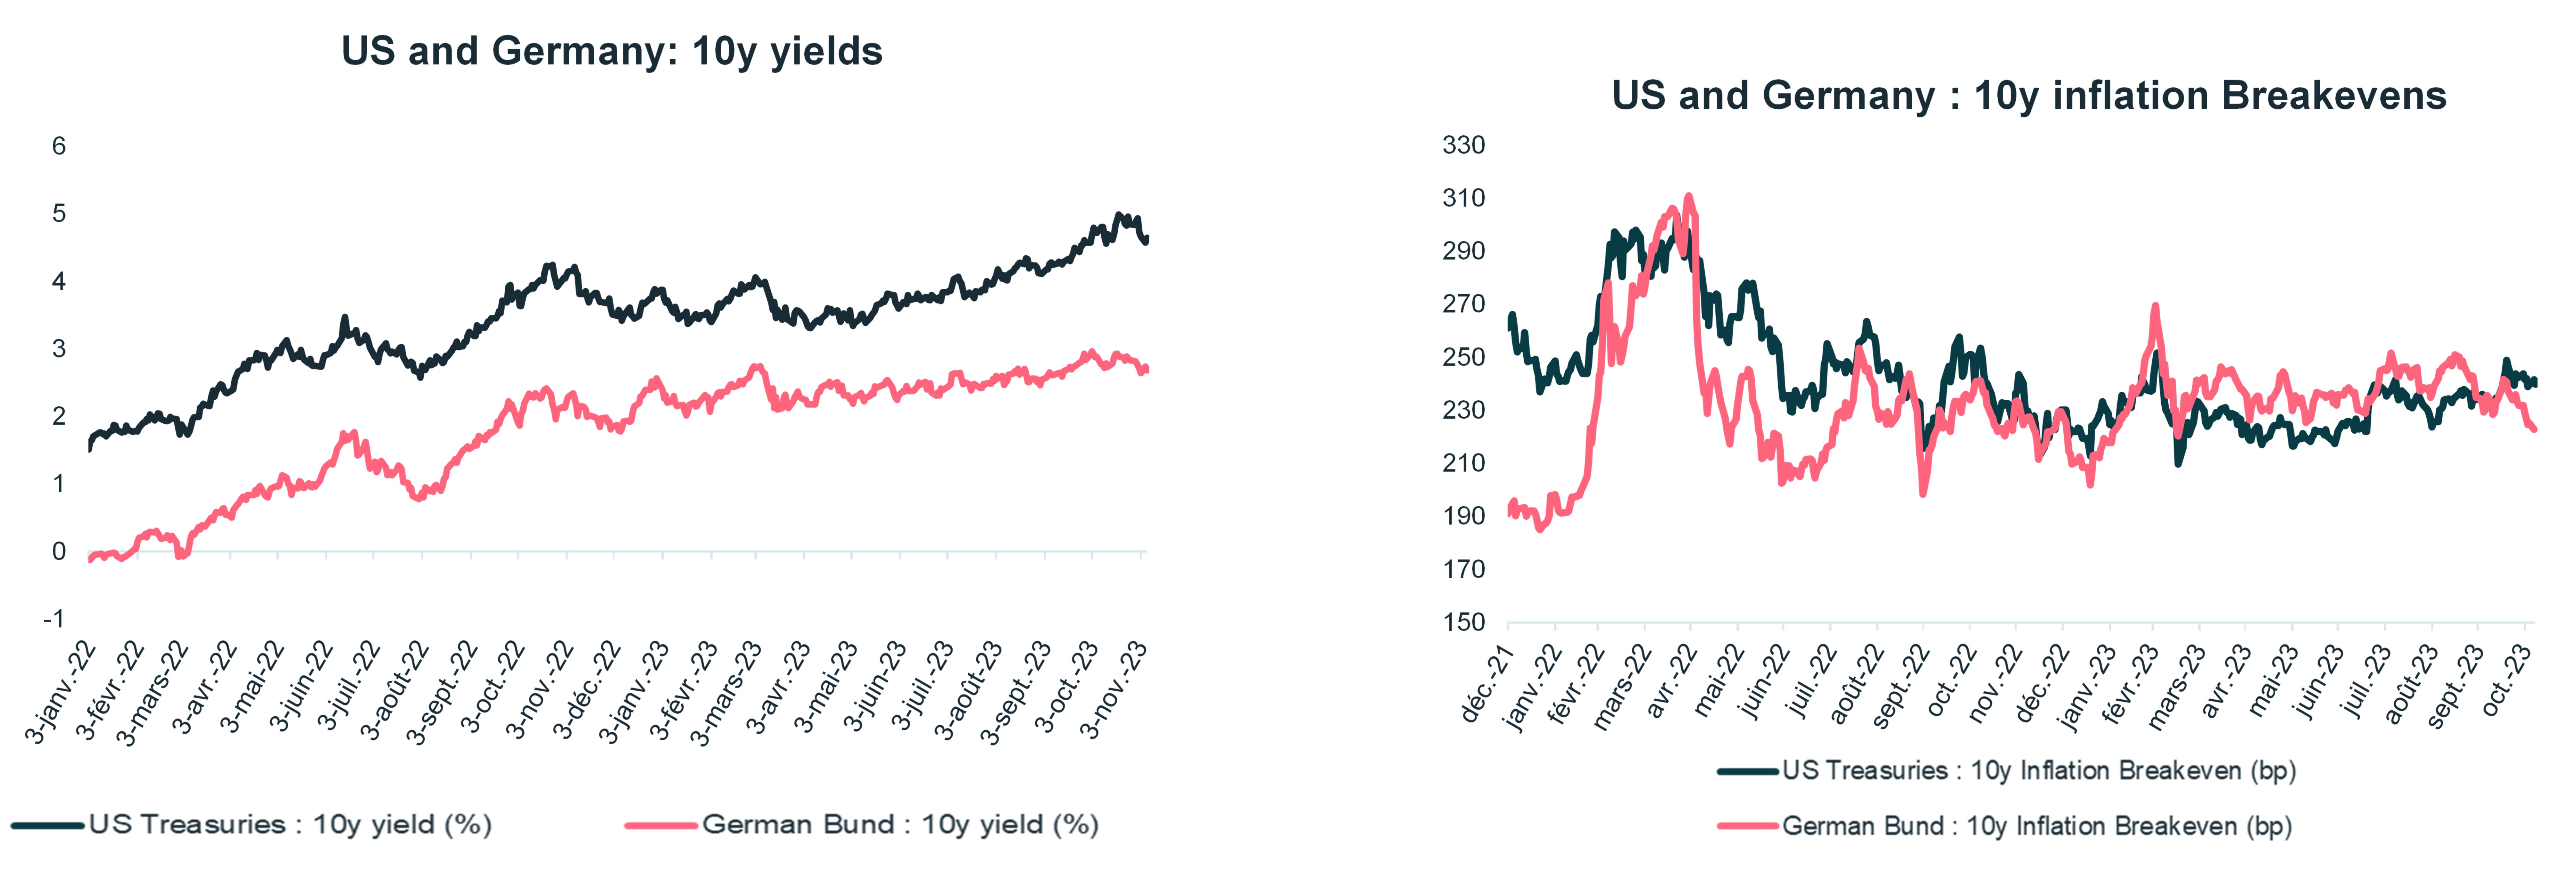 us-and-germany-10-year-yields-and-inflation-breakevens